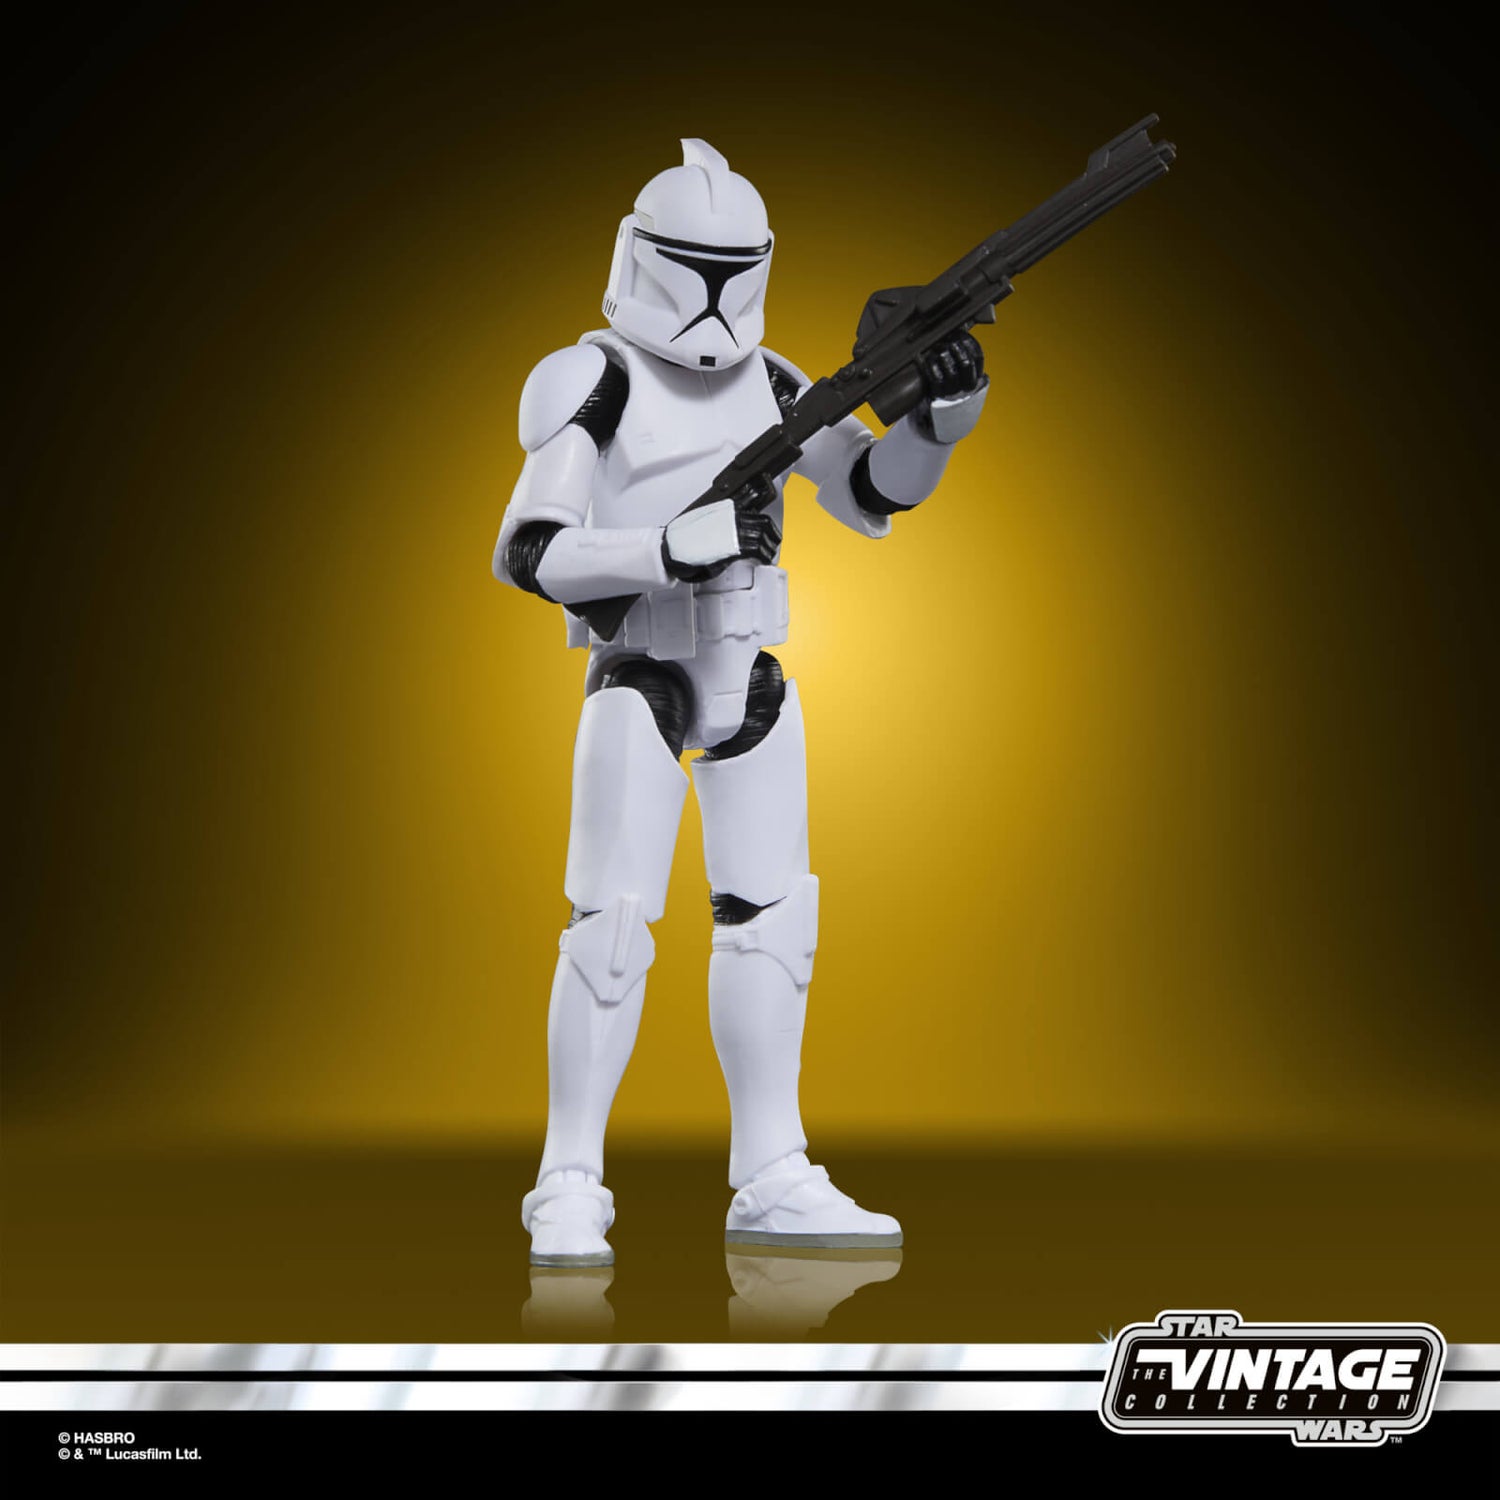 Hasbro Star Wars The Vintage Collection Phase I Clone Trooper, Star Wars: Attack of the Clones Action Figure (3.75”)